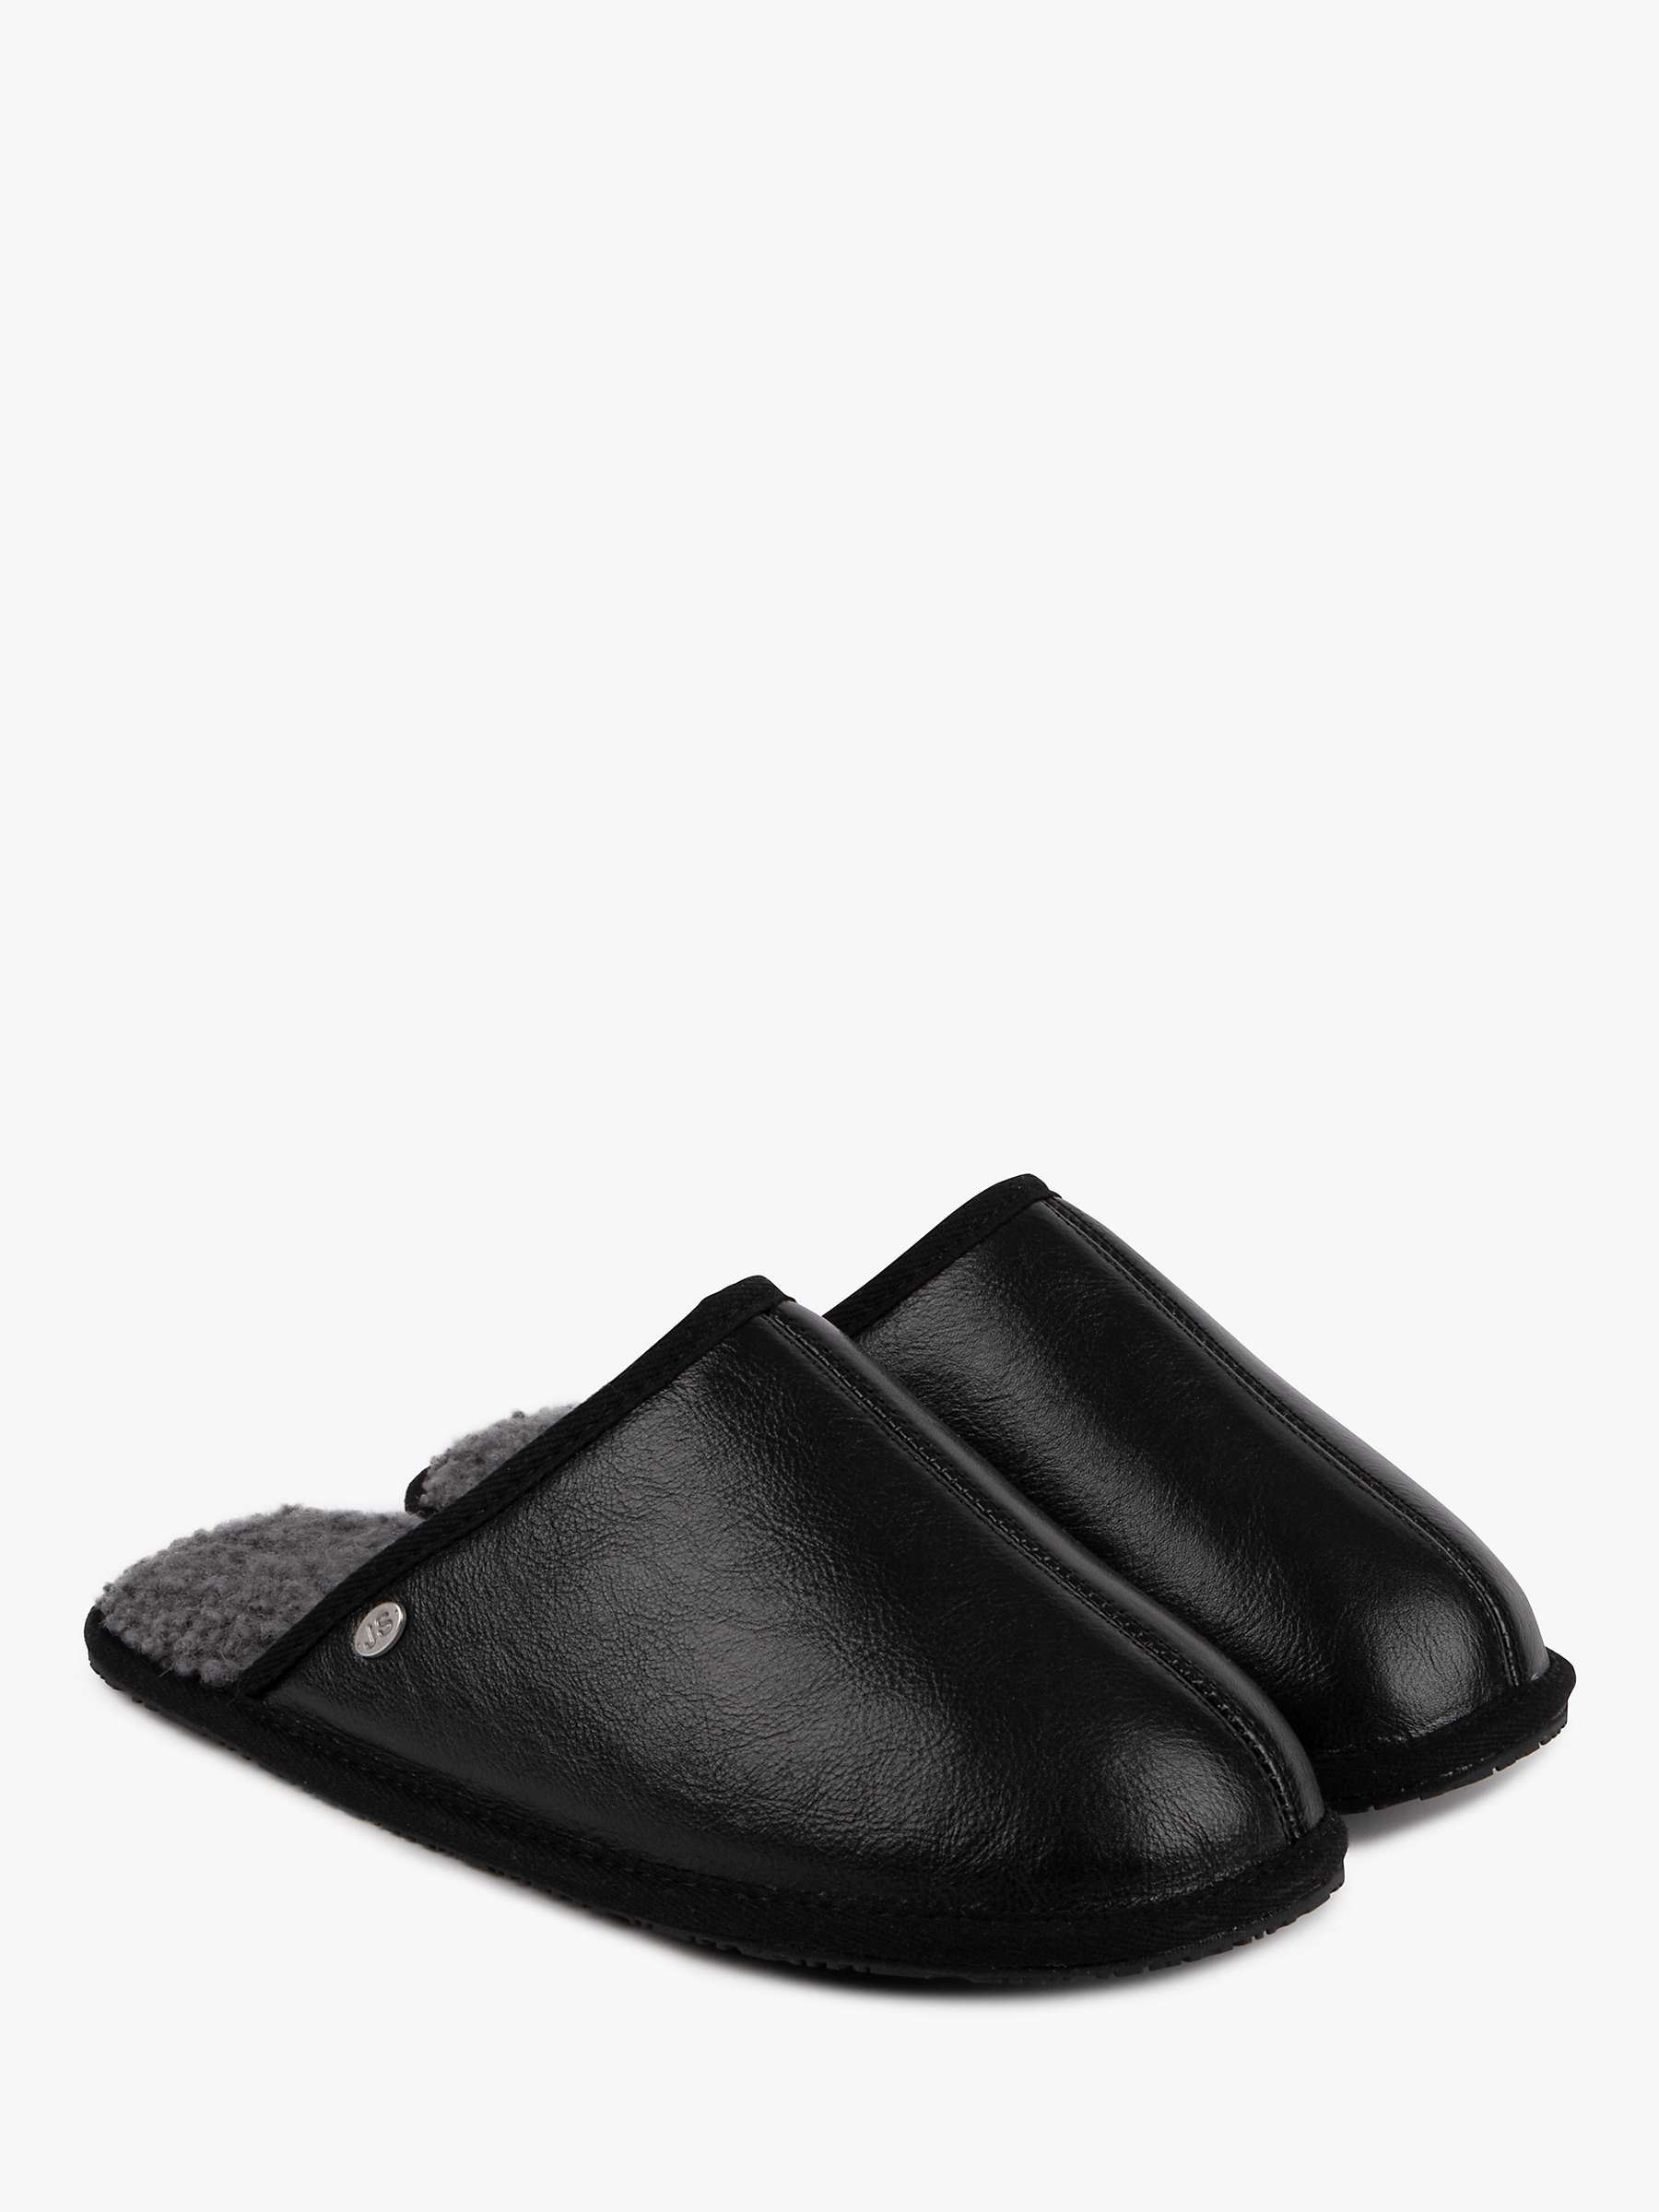 Buy Just Sheepskin Cooper Leather Mule Slippers Online at johnlewis.com